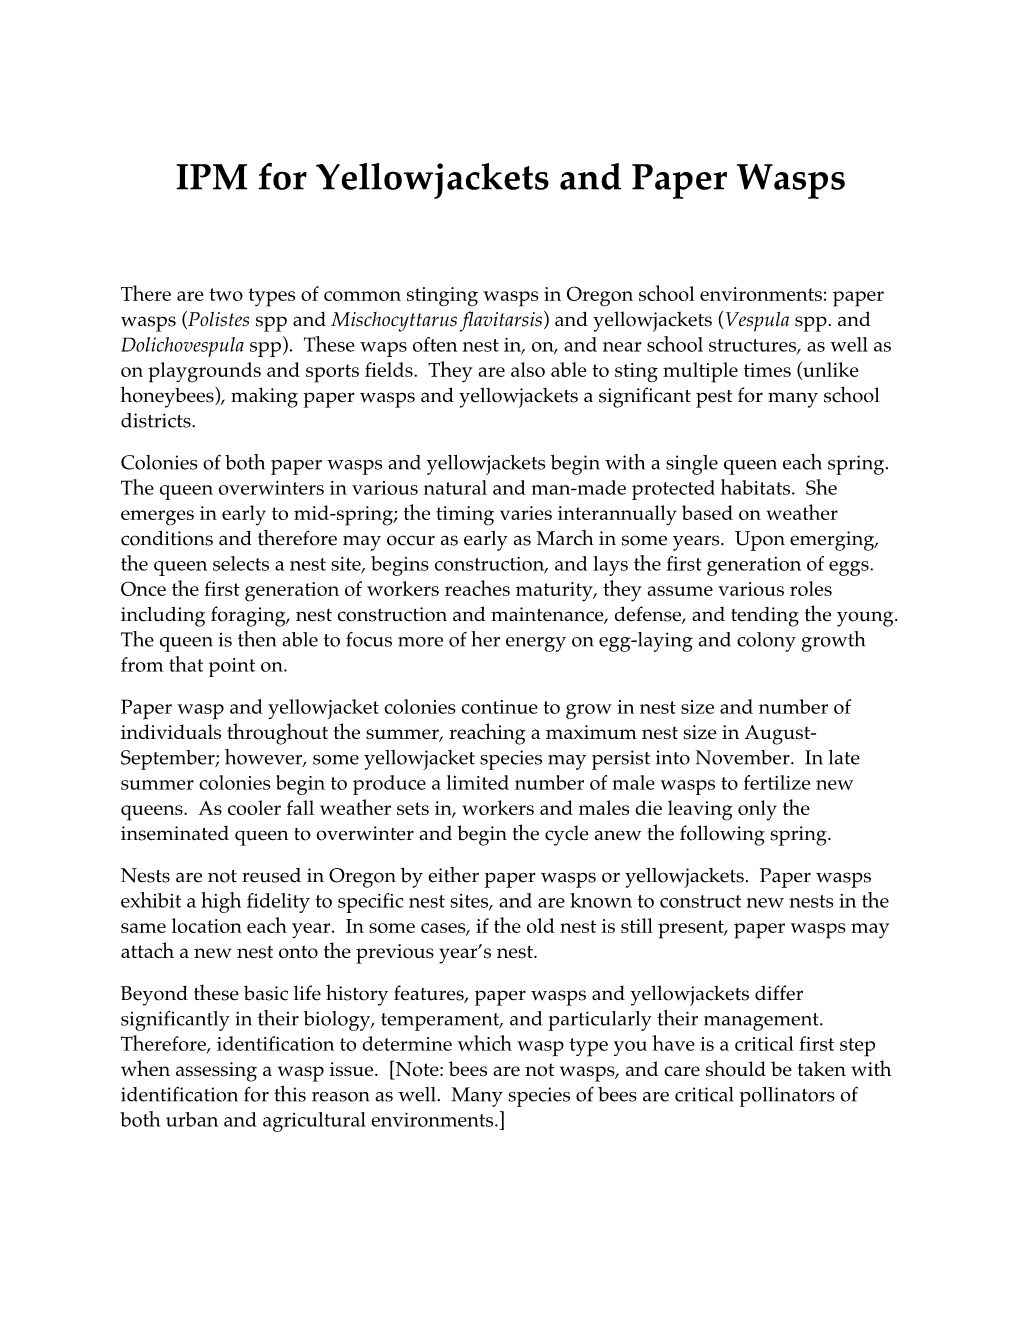 IPM for Yellowjackets and Paper Wasps